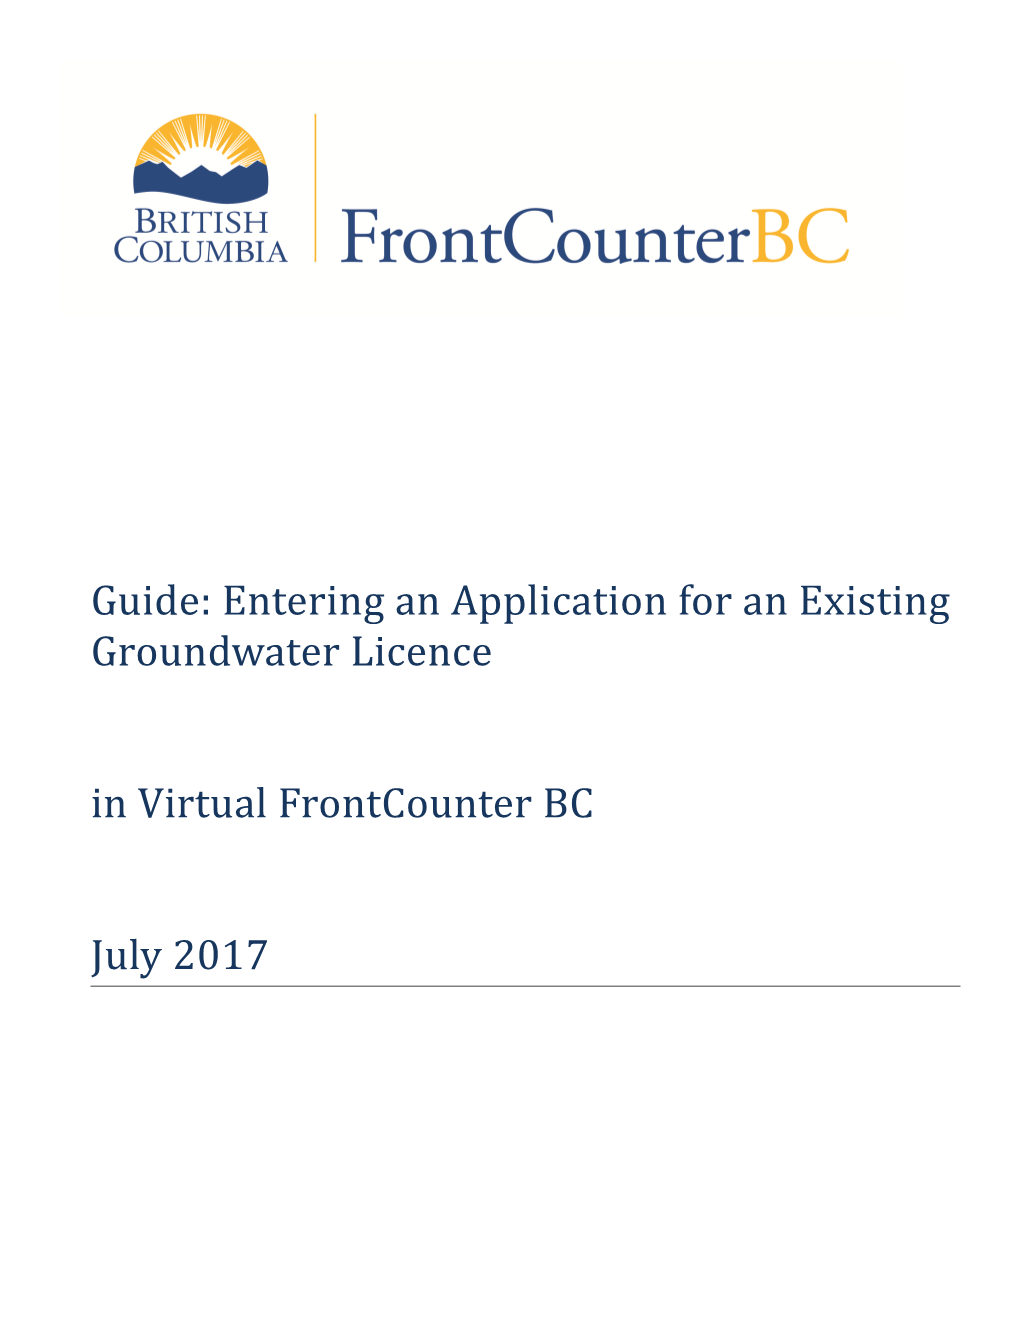 Guide: Entering an Application for an Existing Groundwater Licence